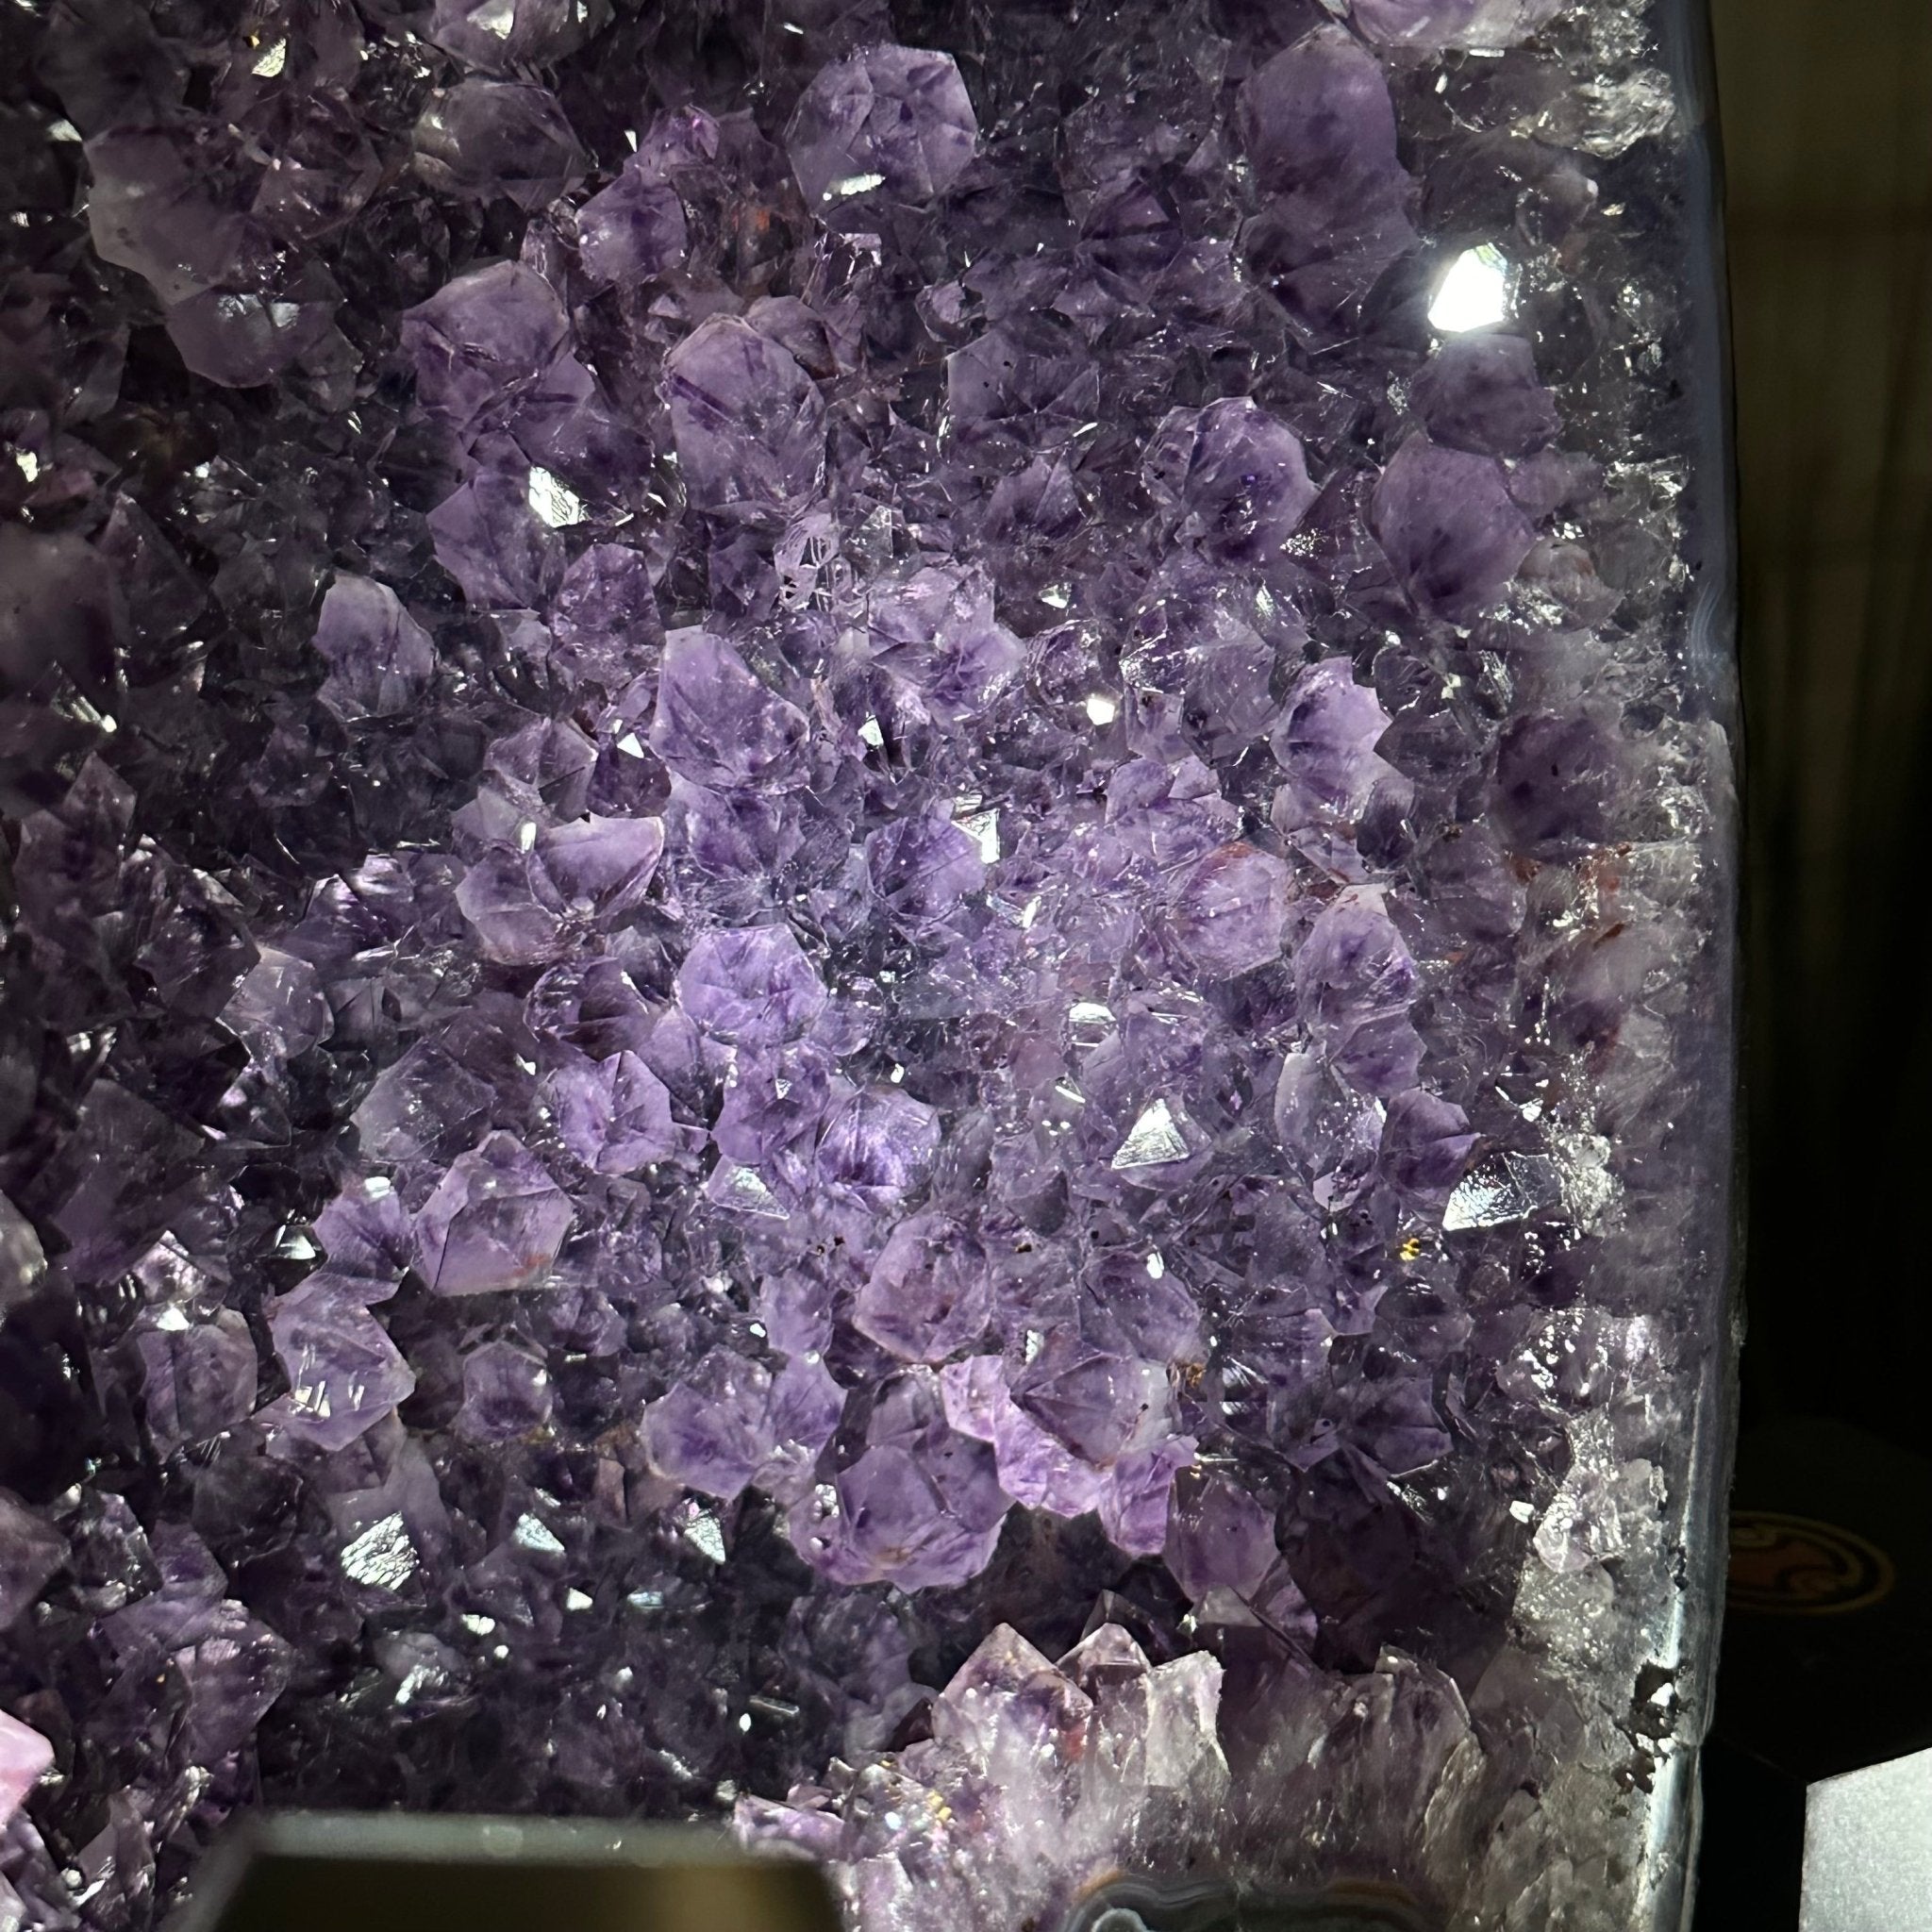 Quality Brazilian Amethyst Cathedral, 20.9 lbs & 18.7" Tall, #5601 - 1390 - Brazil GemsBrazil GemsQuality Brazilian Amethyst Cathedral, 20.9 lbs & 18.7" Tall, #5601 - 1390Cathedrals5601 - 1390